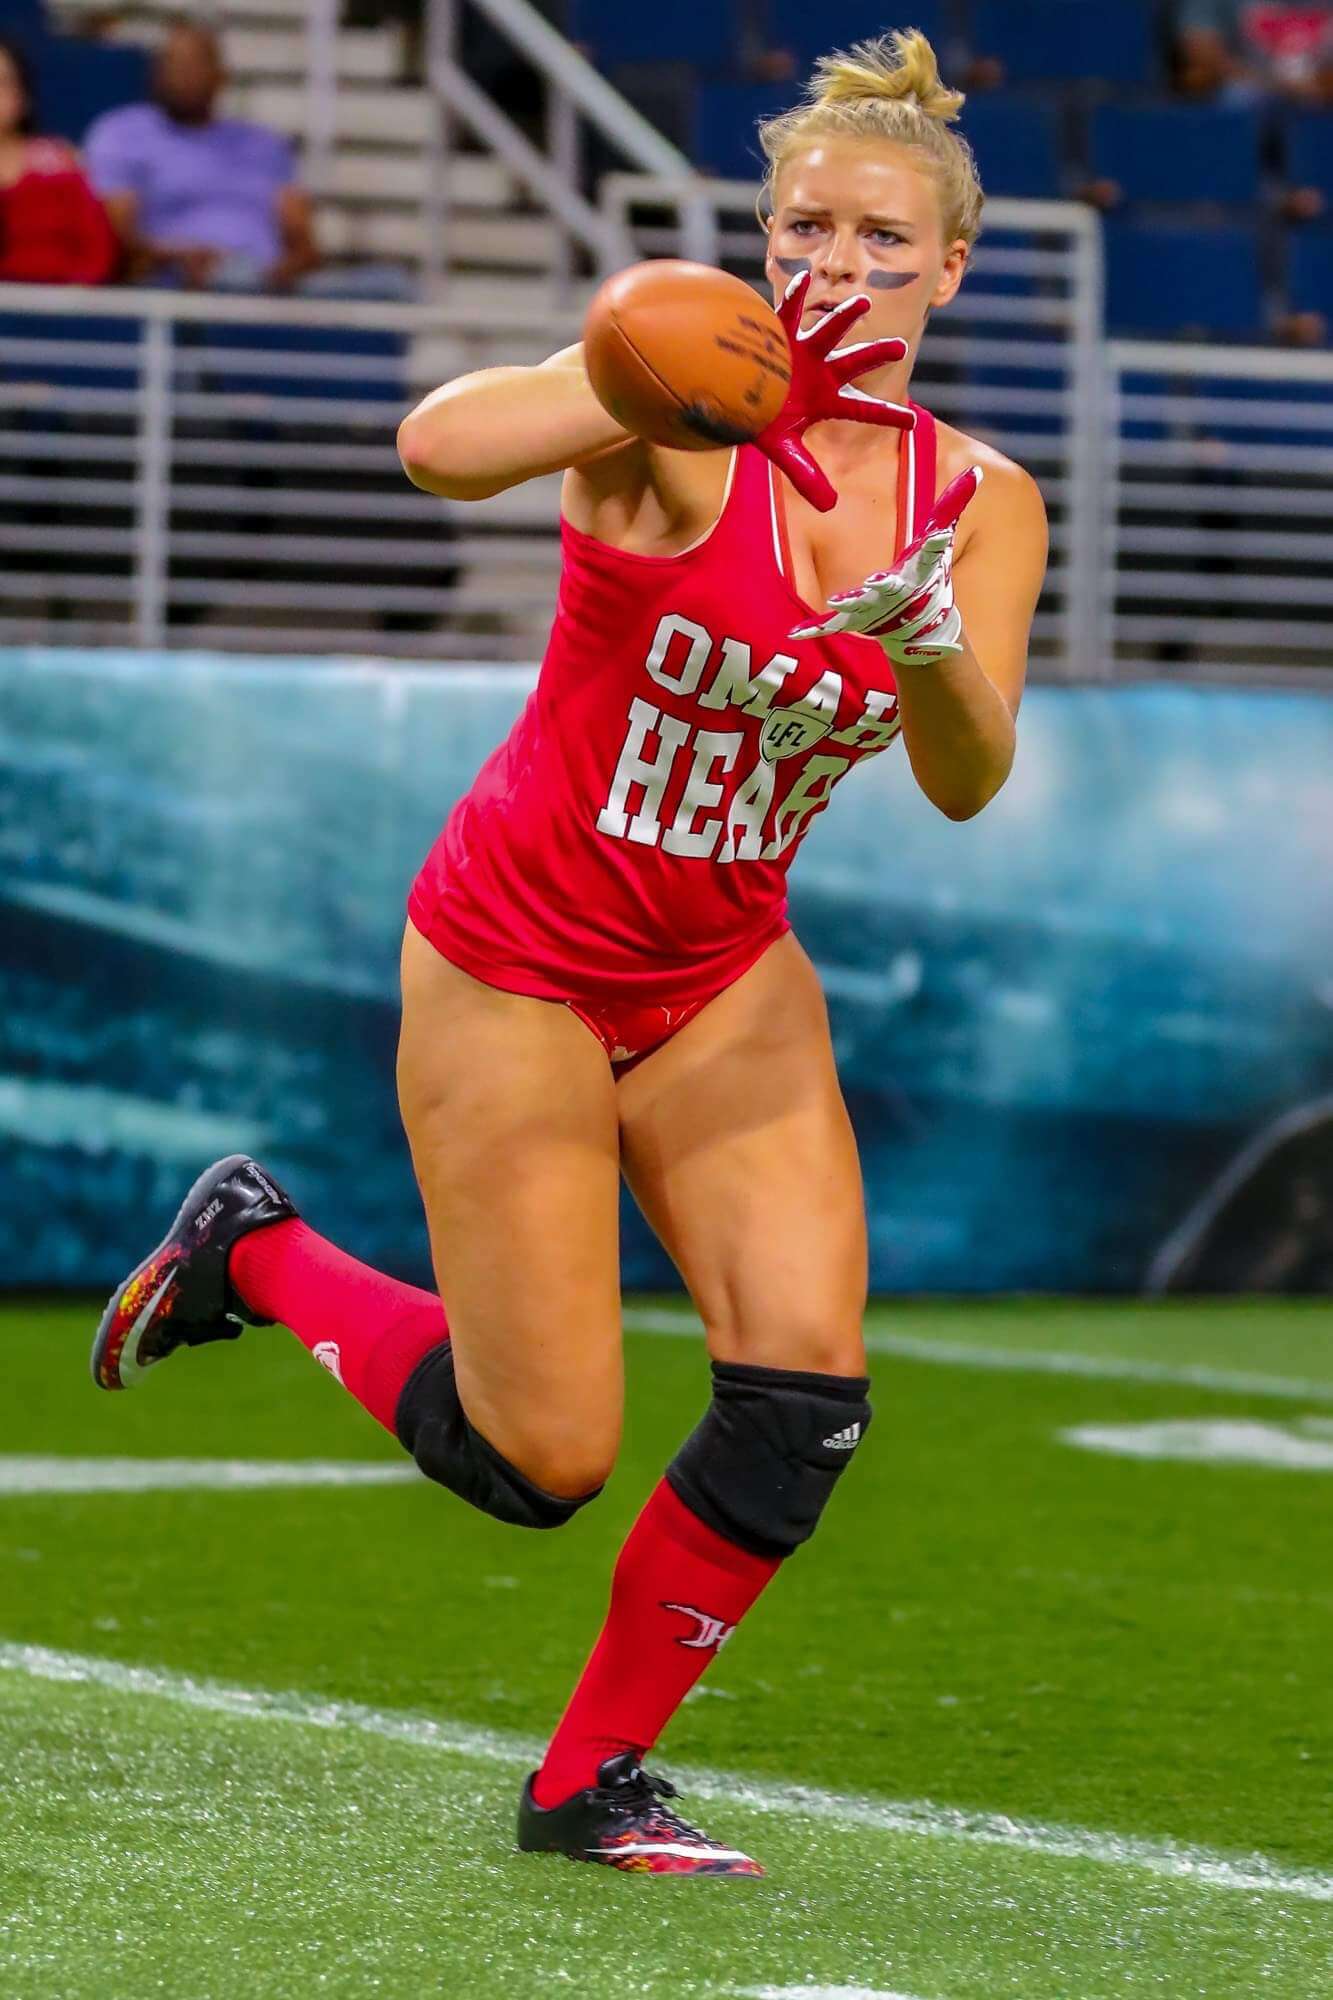 The Legends Football League Beautiful Women And Football, Need We Say Anymore! 44